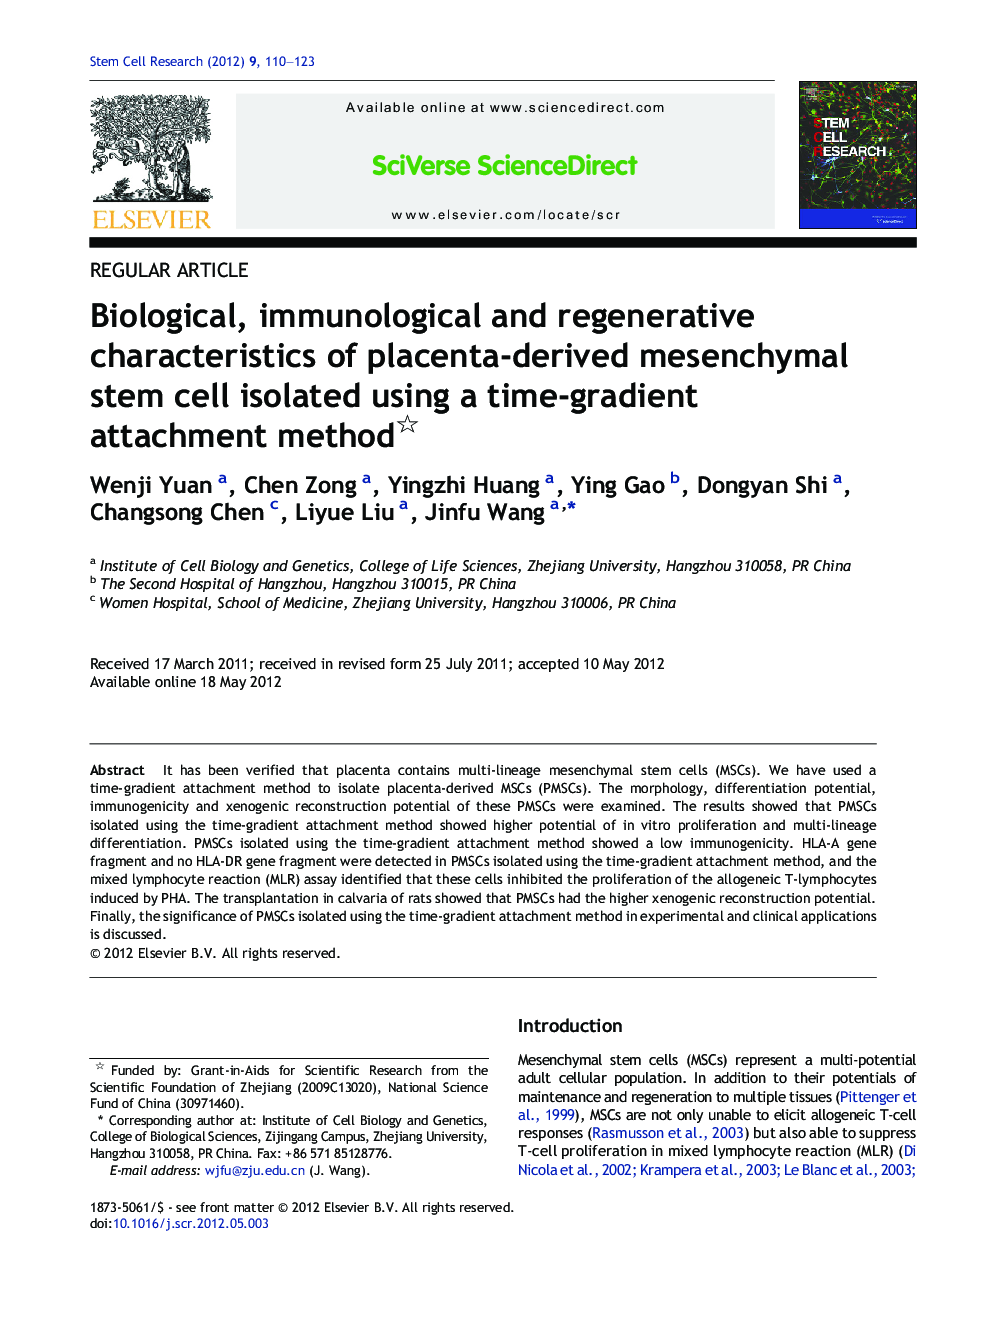 Biological, immunological and regenerative characteristics of placenta-derived mesenchymal stem cell isolated using a time-gradient attachment method 